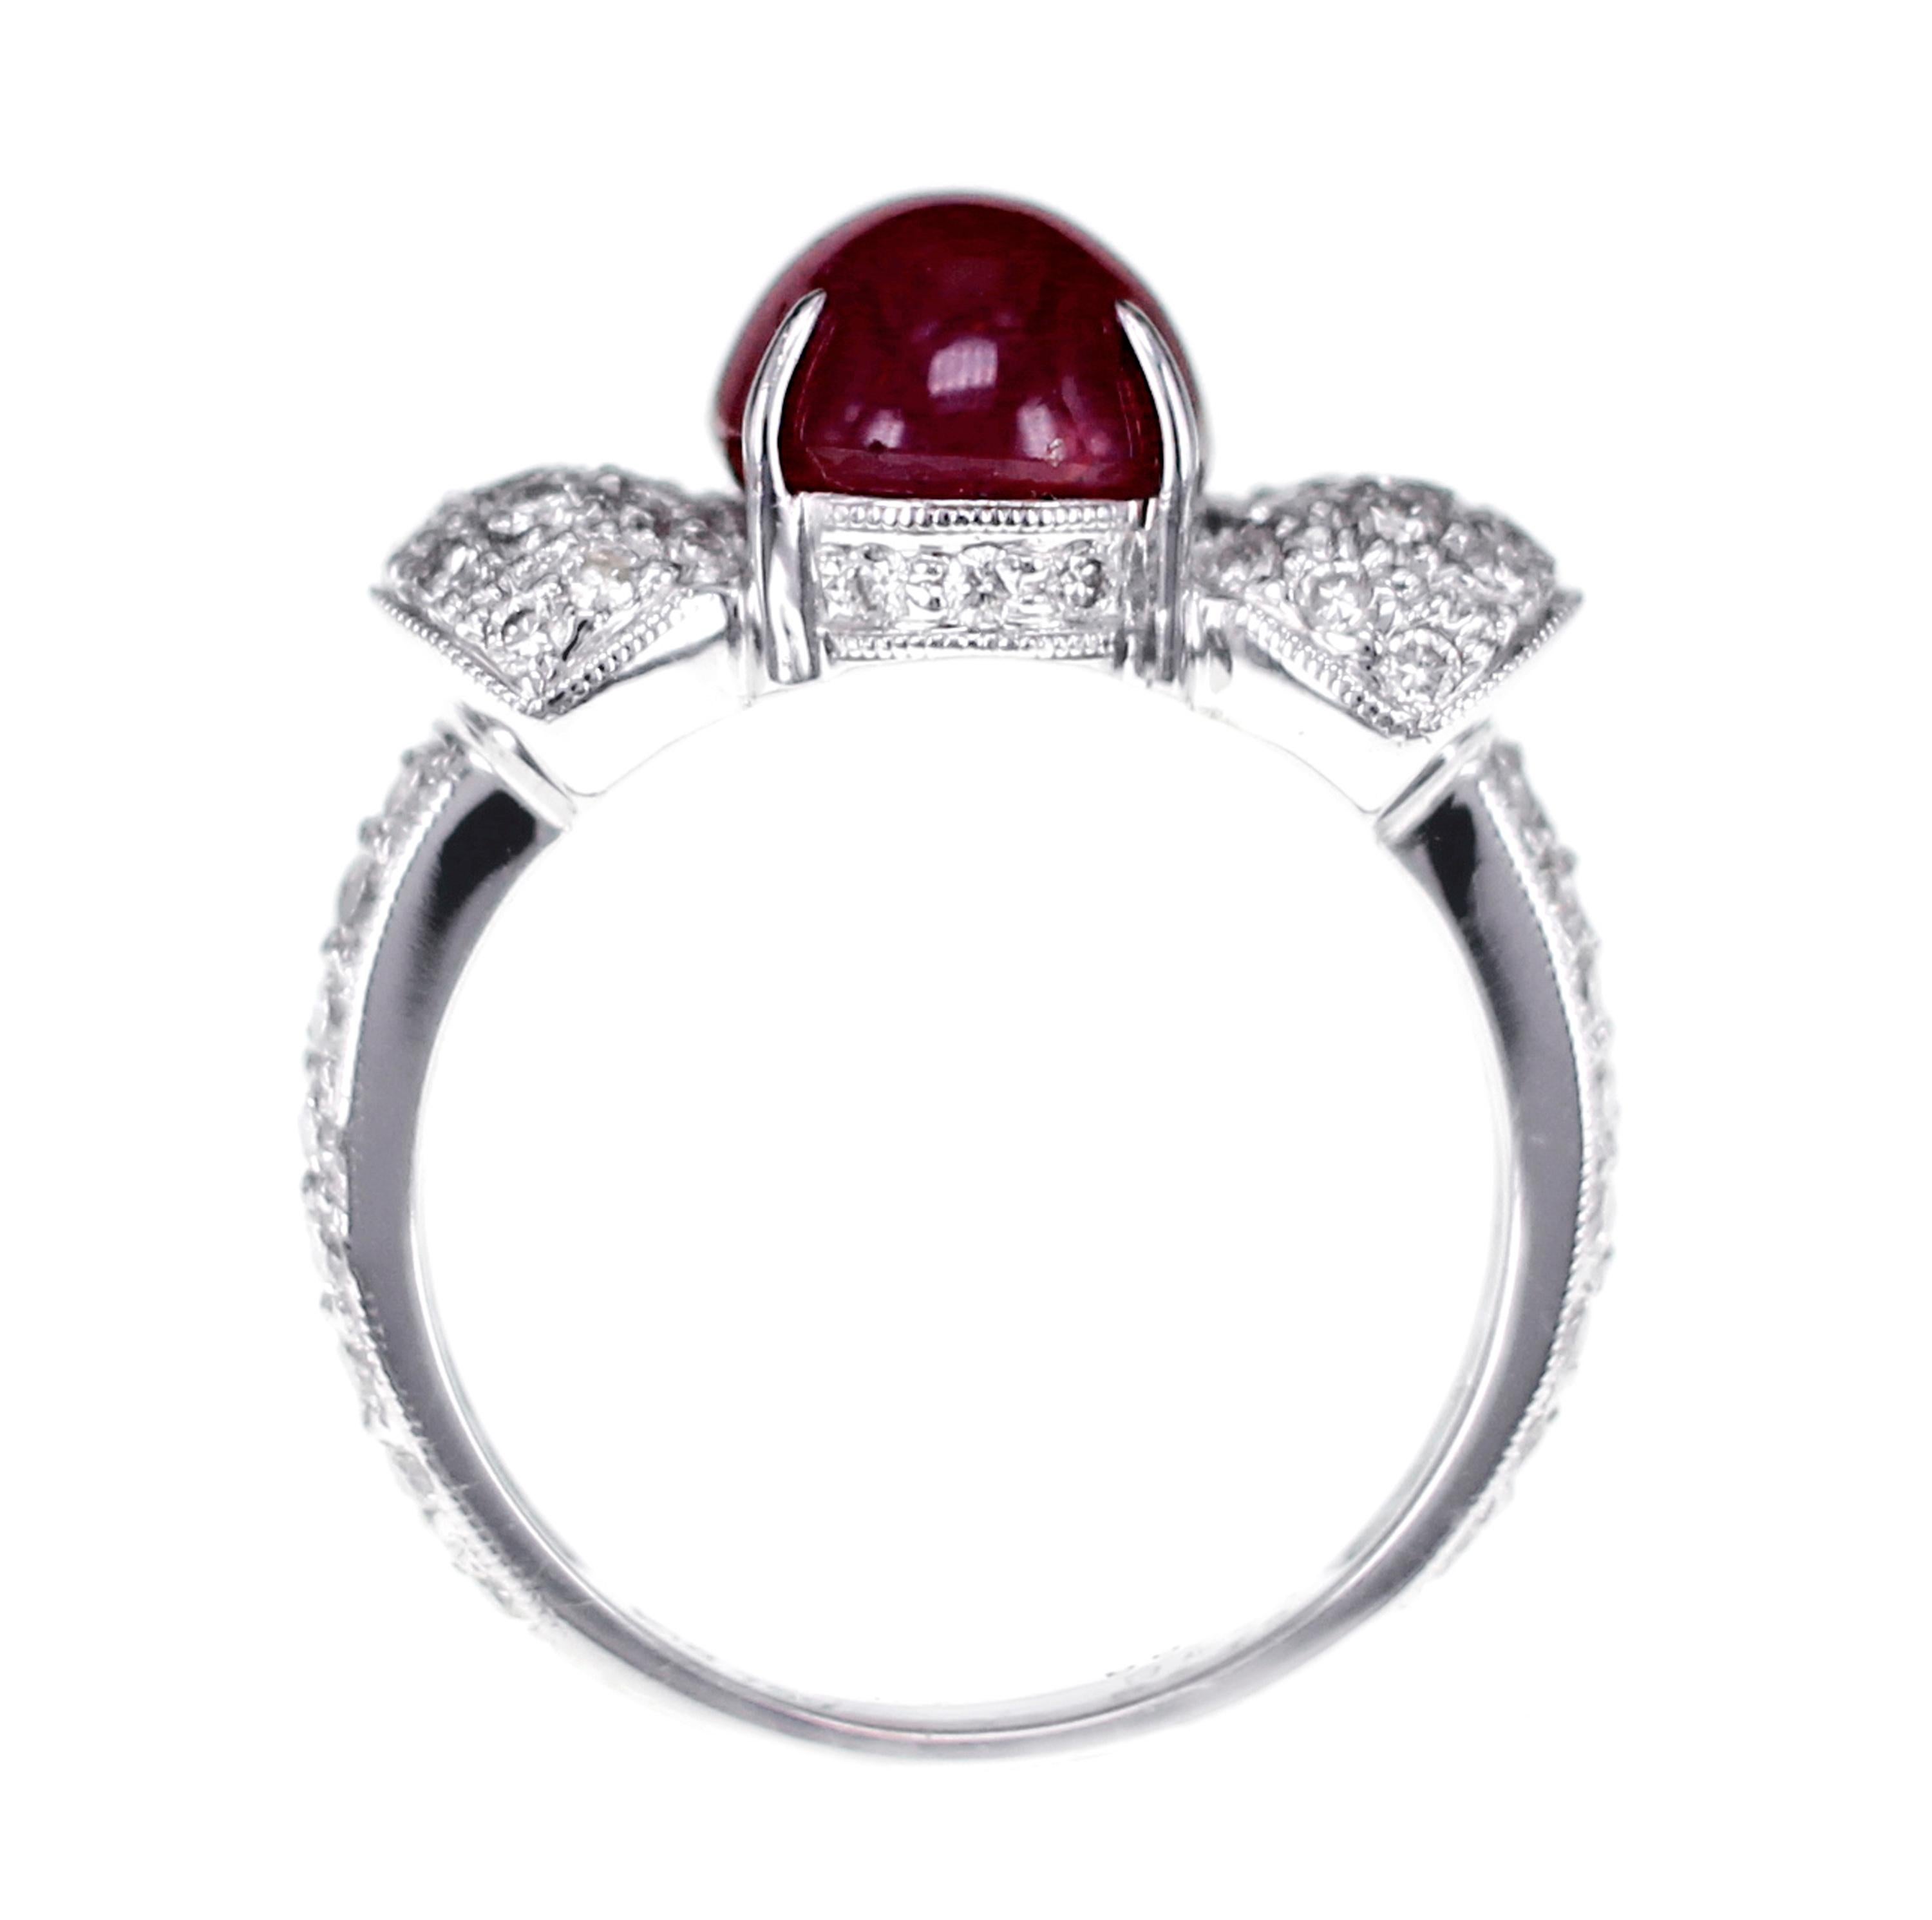 Anglo-Indian 4.79 Carat Ruby Solitare Ring For Sale